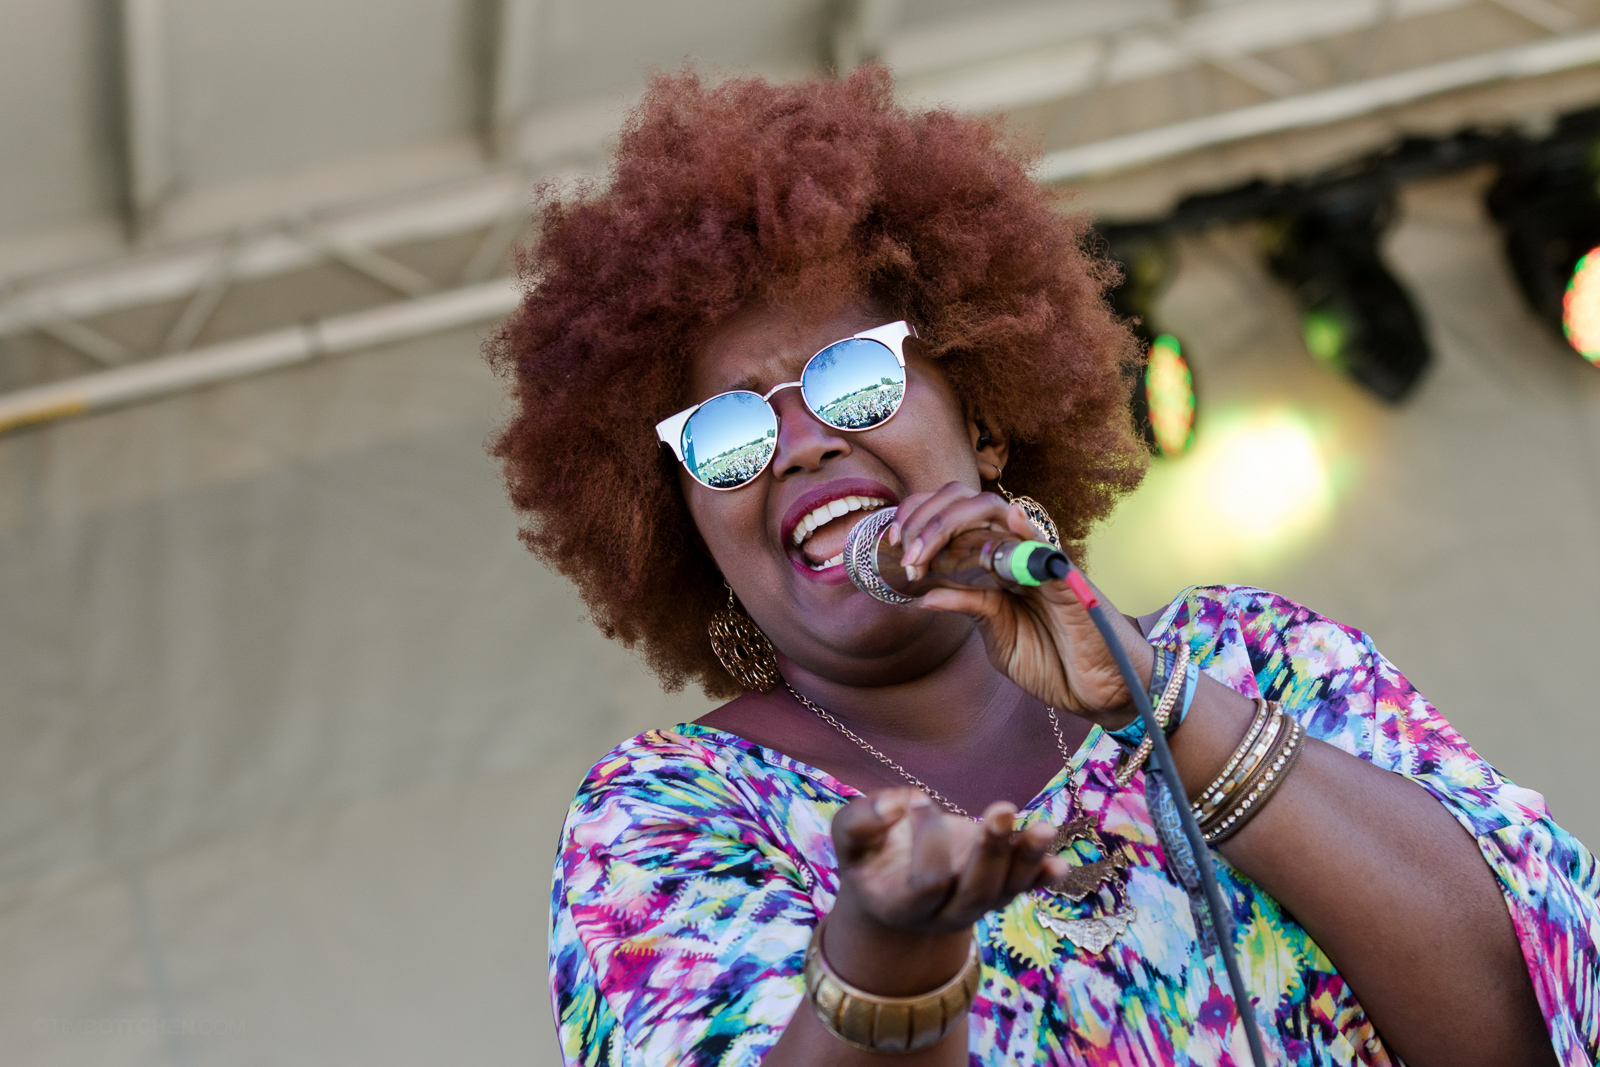 The Suffers at LouFest